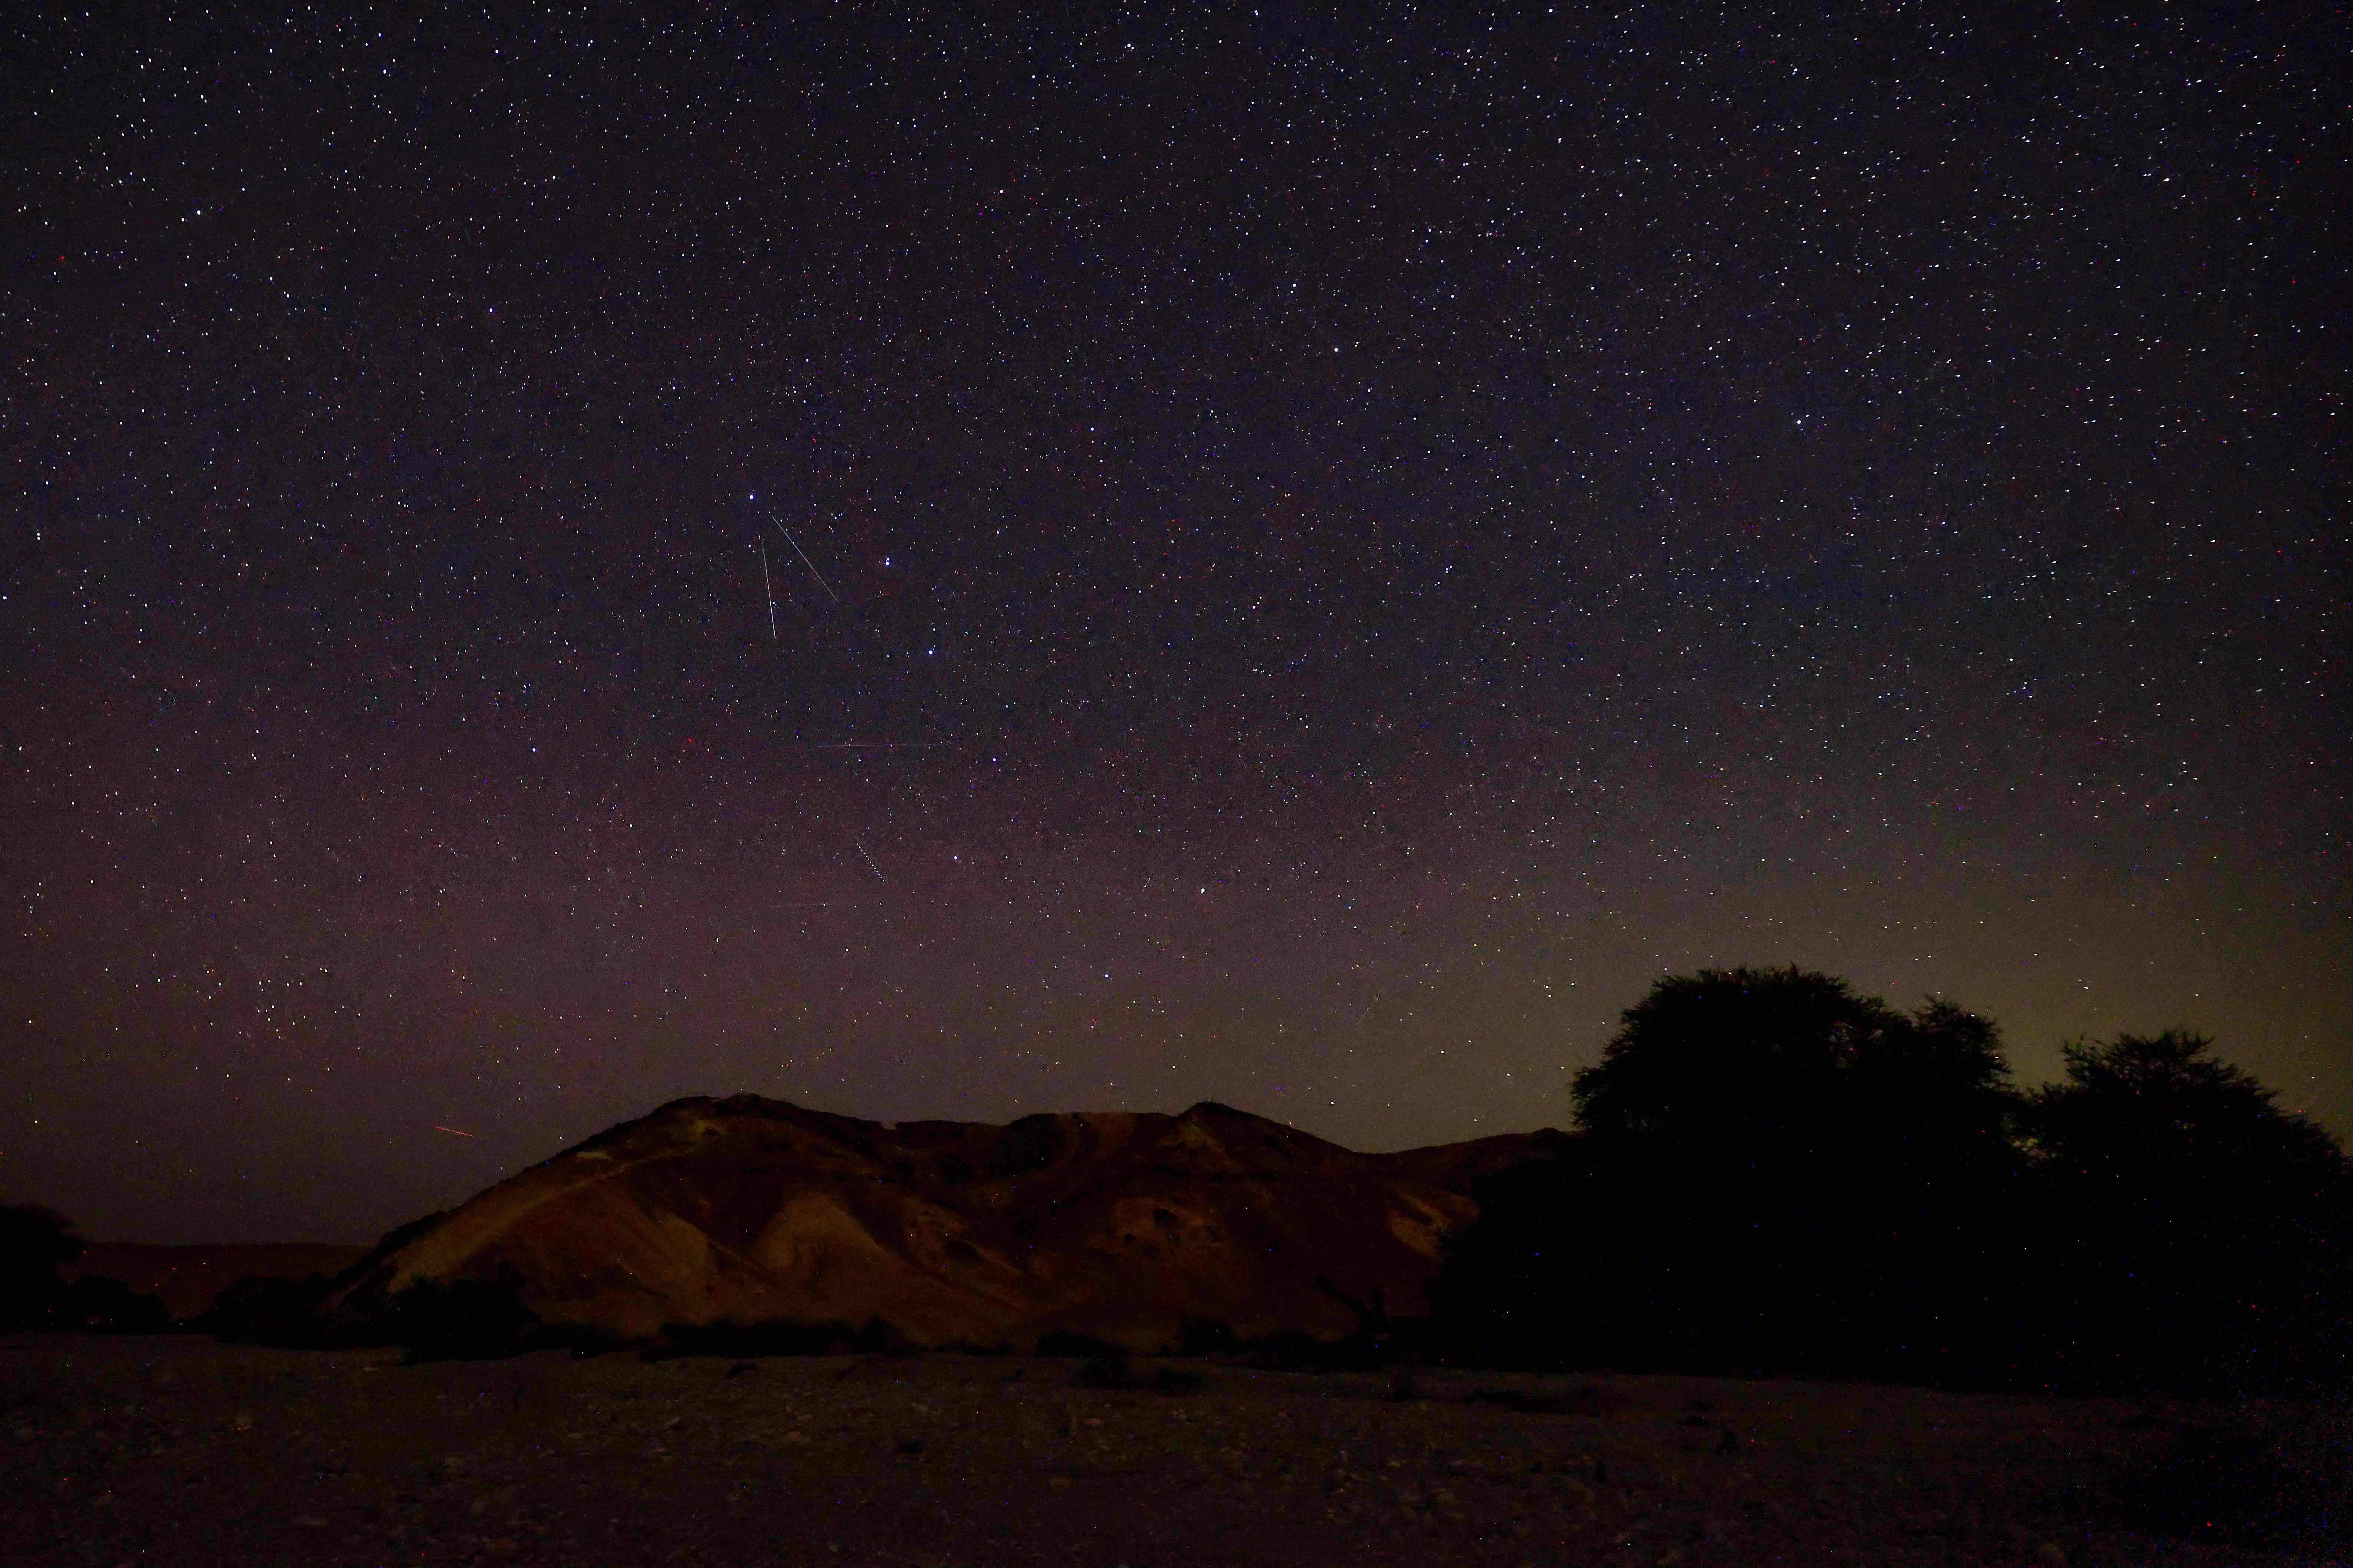 Perseid meteors streaks across the sky above a camping site in the southern israel Negev desert near the Israeli village of Faran early on 12 August 2023